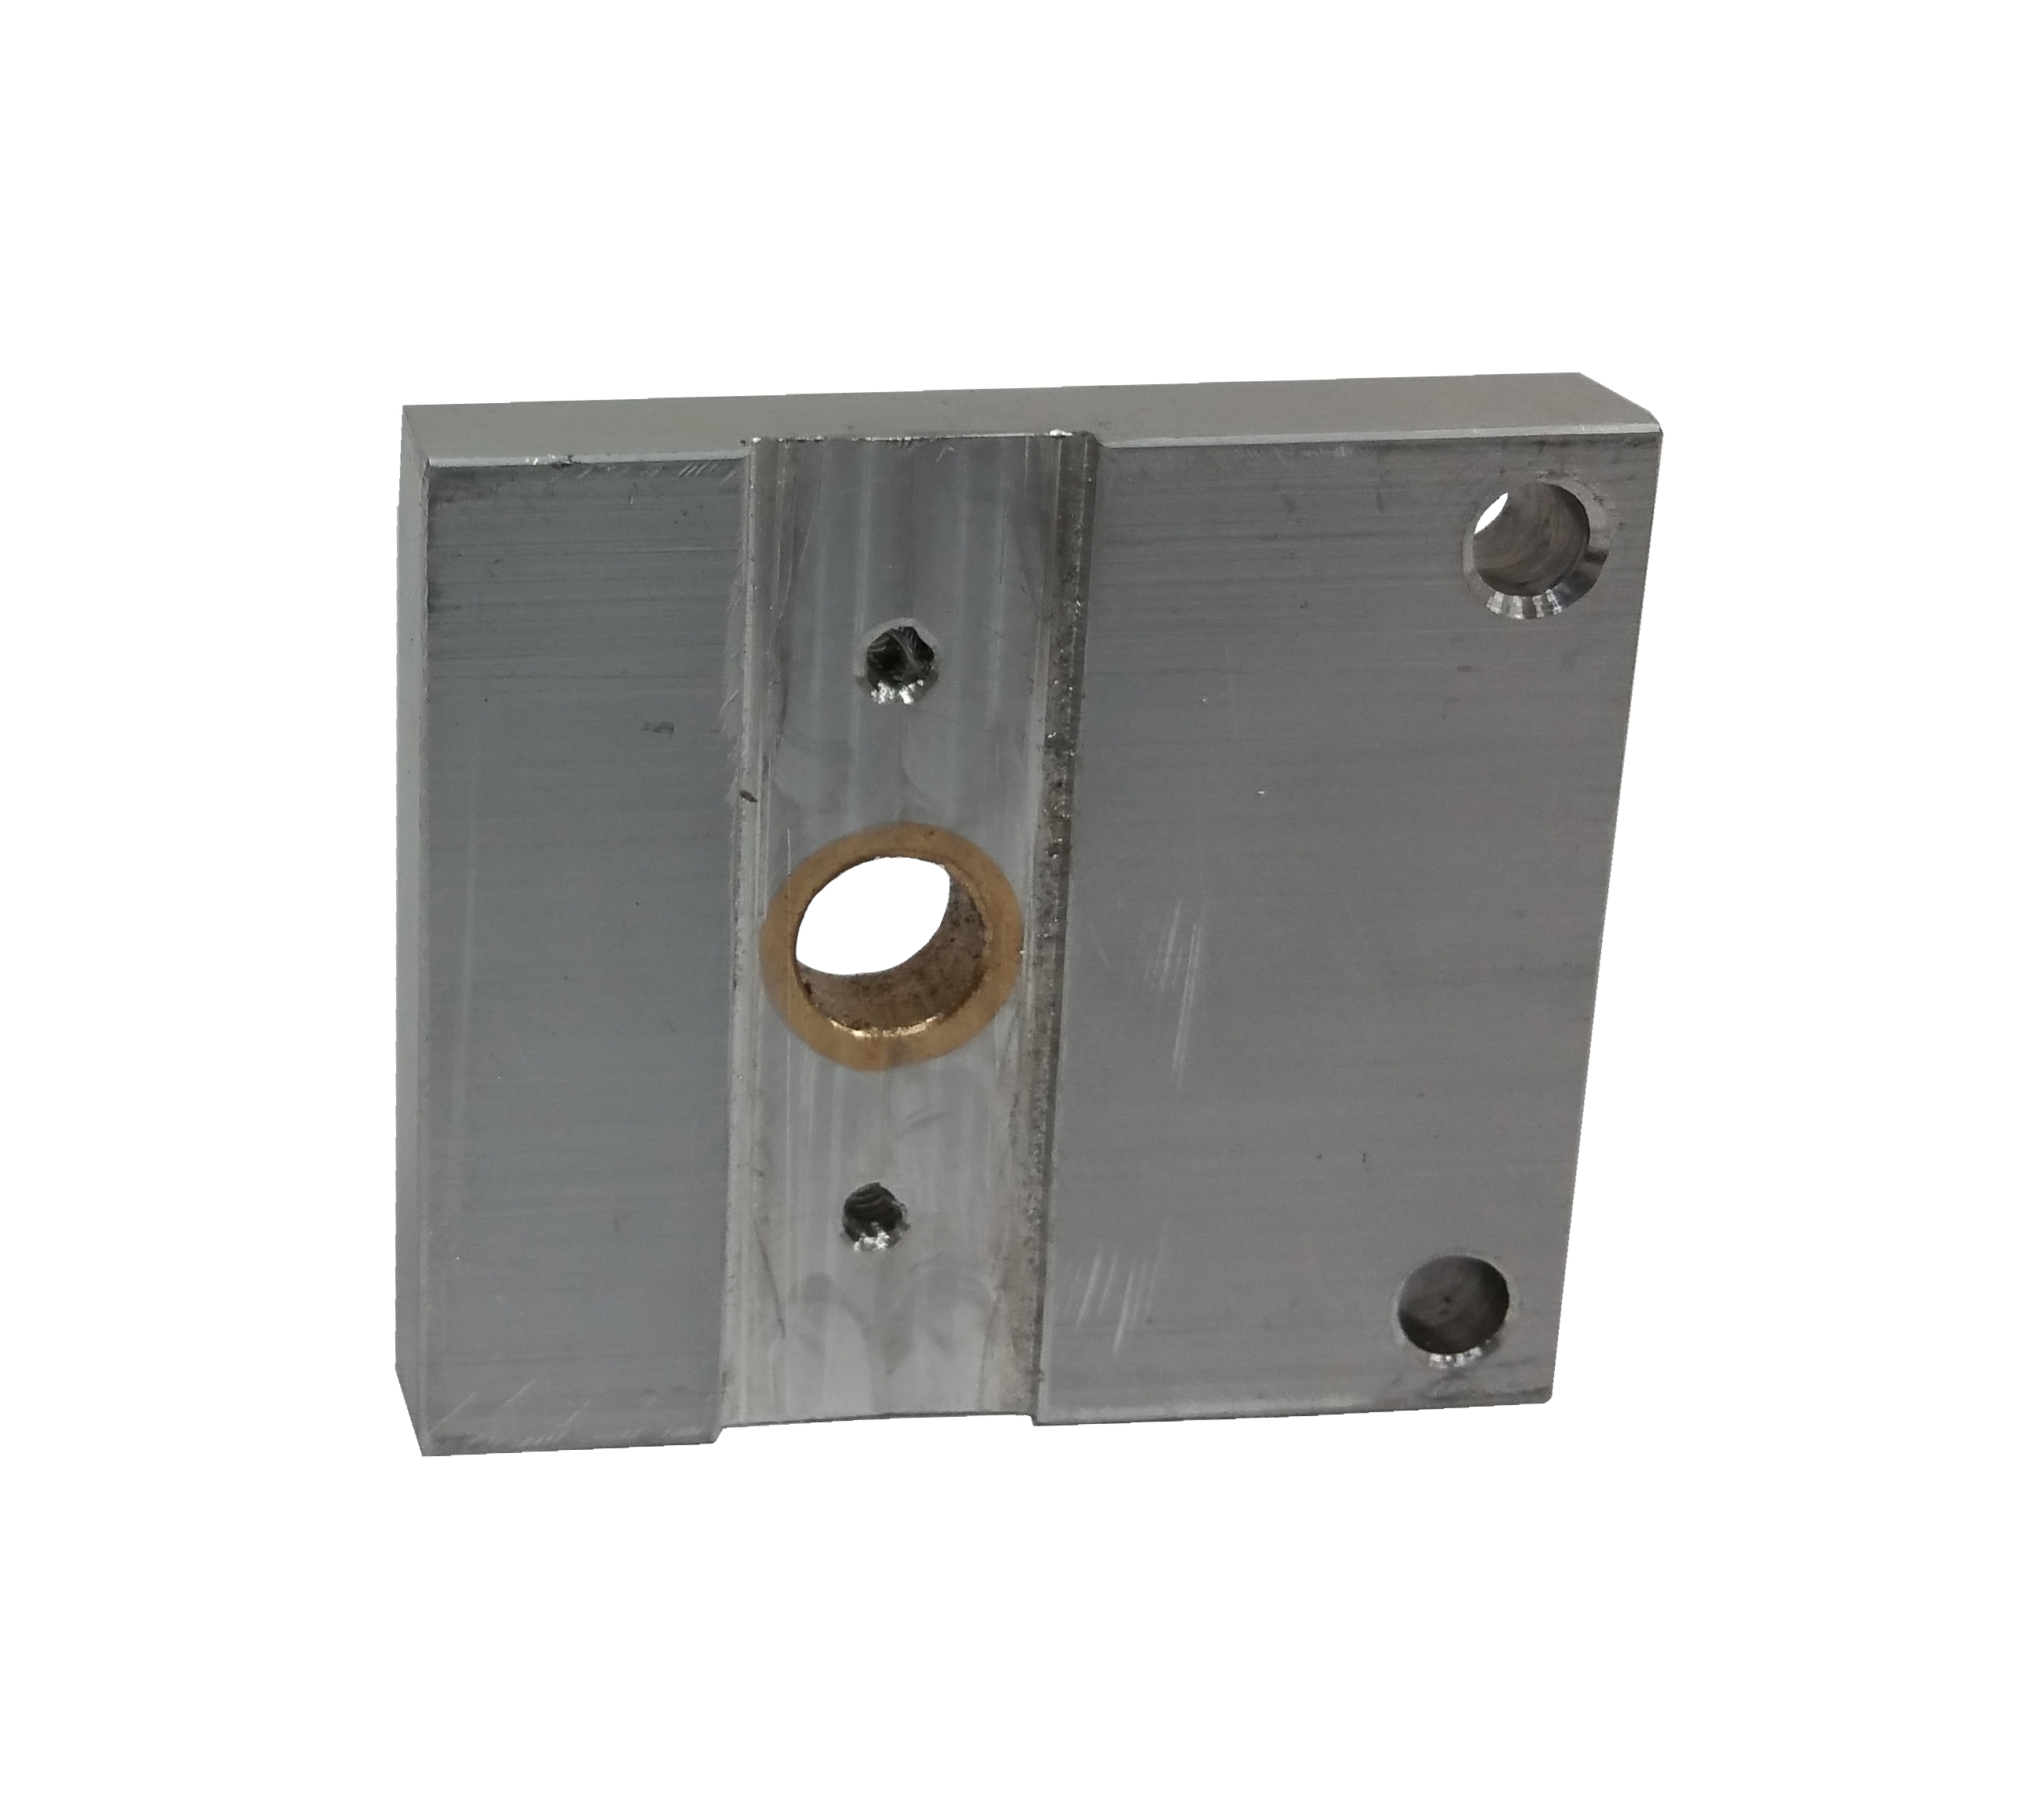 Machined Part - Aluminum bar with 5/16 in. x 0.625 in. rectangular cut-out across full width—(2) #6-32 drilled and tapped holes, and (2) 0.218 in. O.D. holes